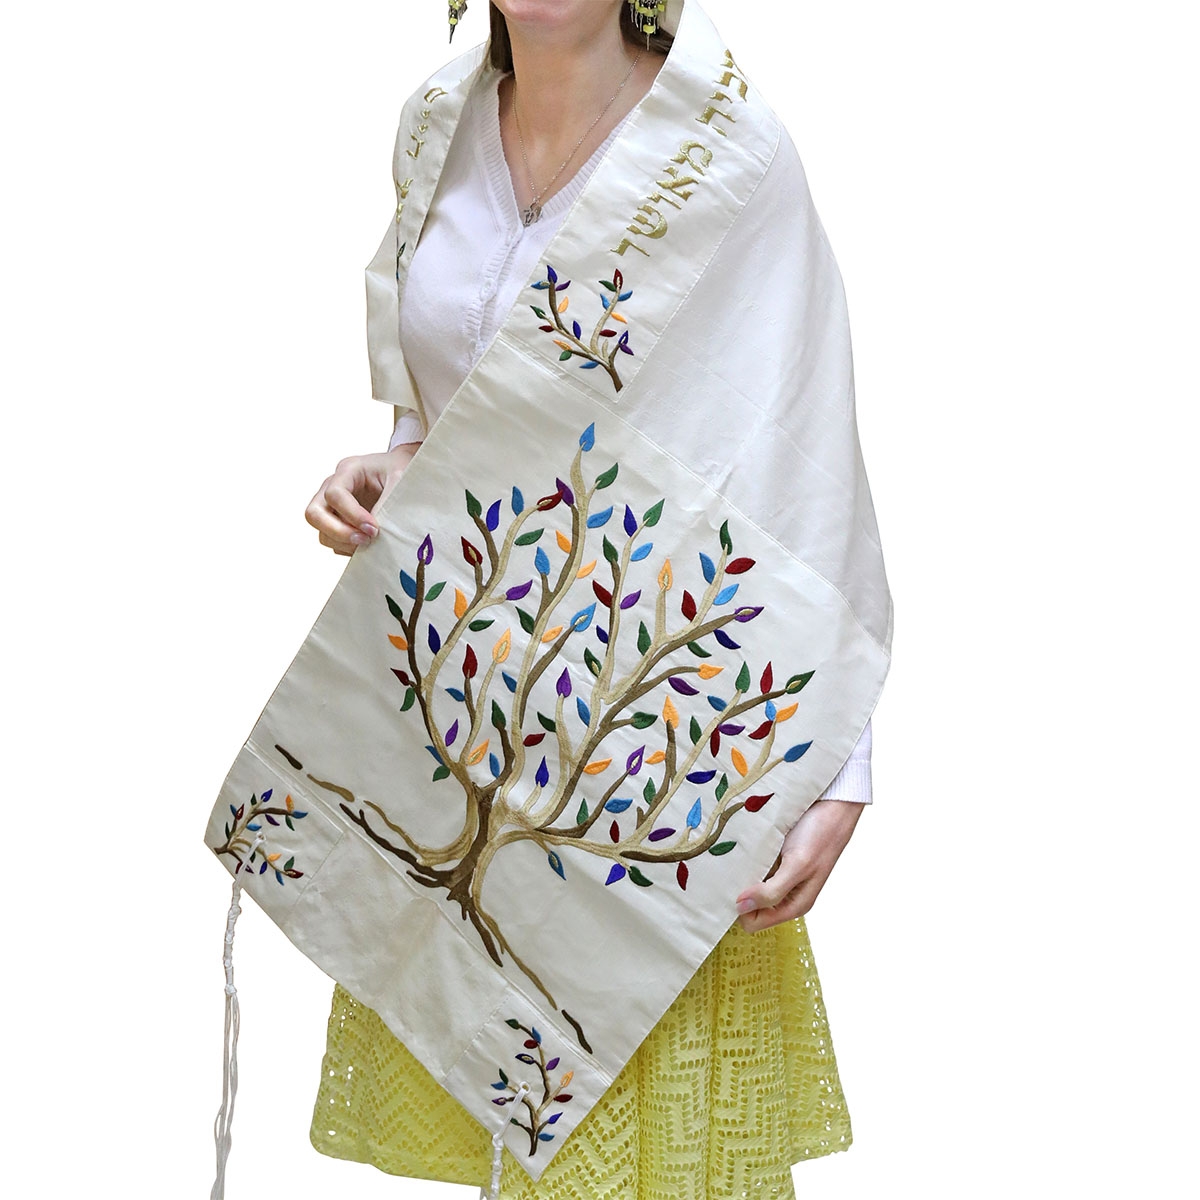 Honor Your Roots with Tree of Life Gifts From Israel